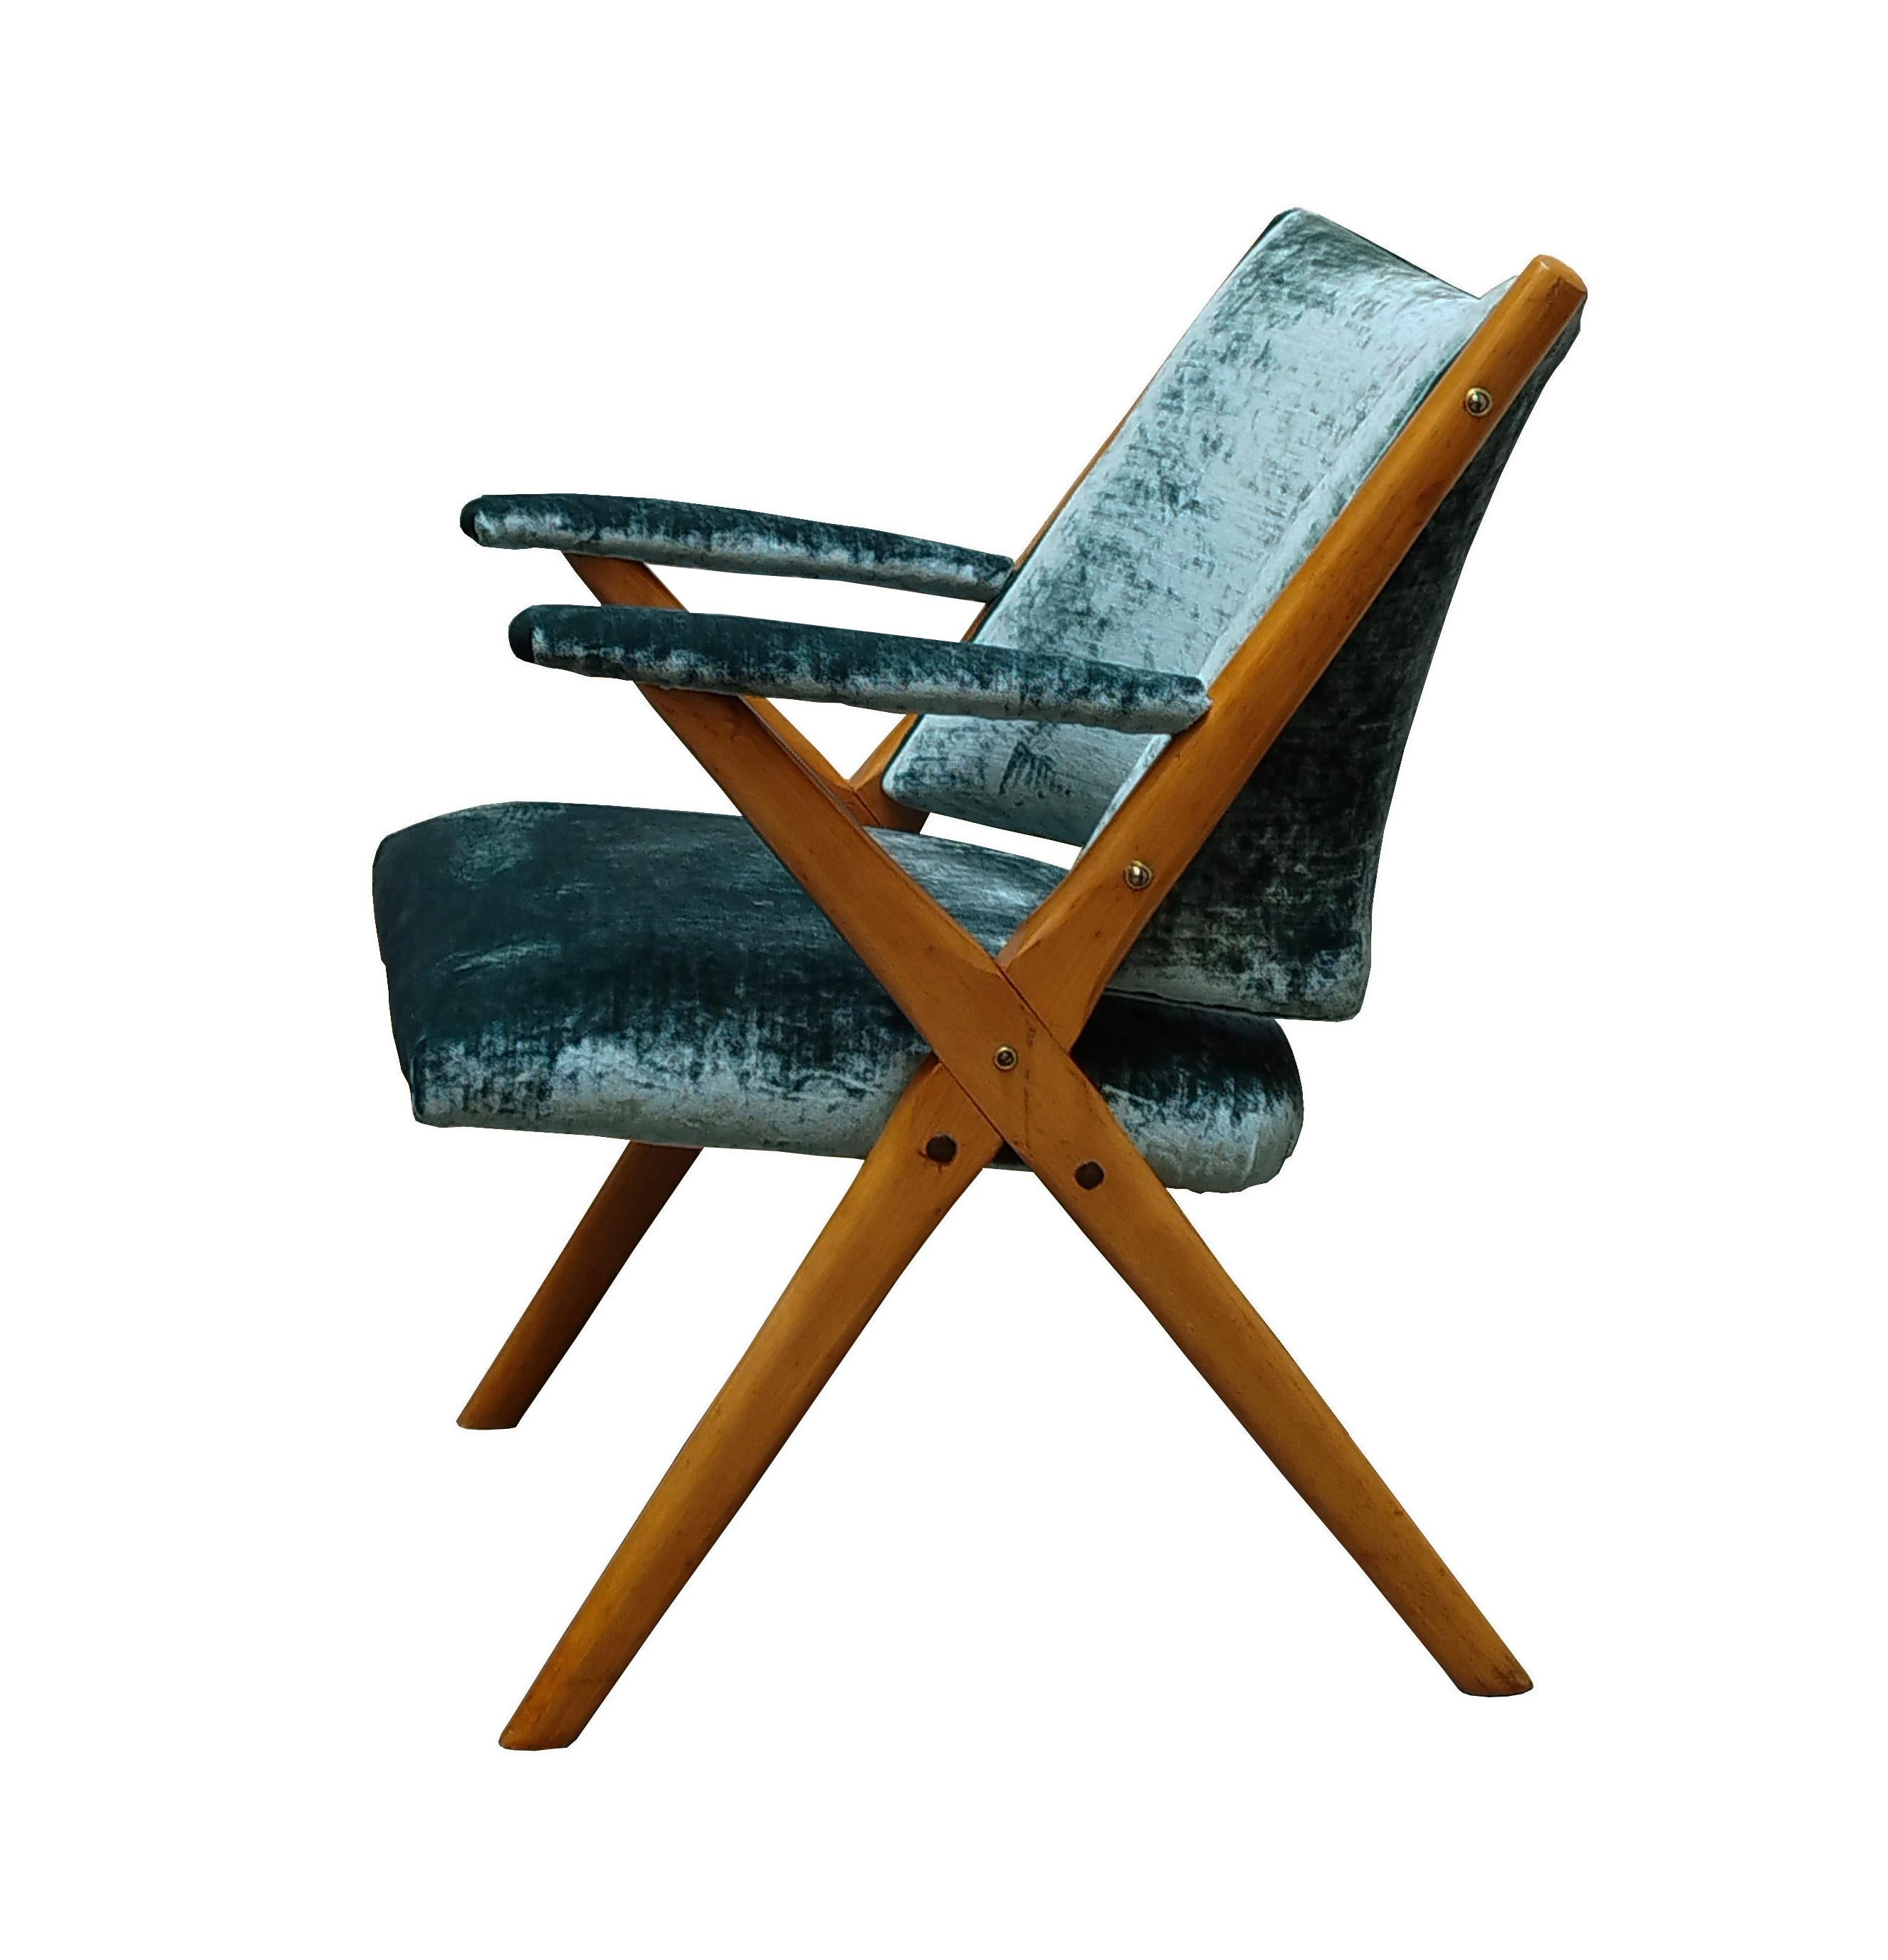 Armchair produced in the 1960s in Italy by Dal Vera.
Moulded solid wood frame.
Metal seat and back upholstered and covered with new green fabric.
Good overall condition.